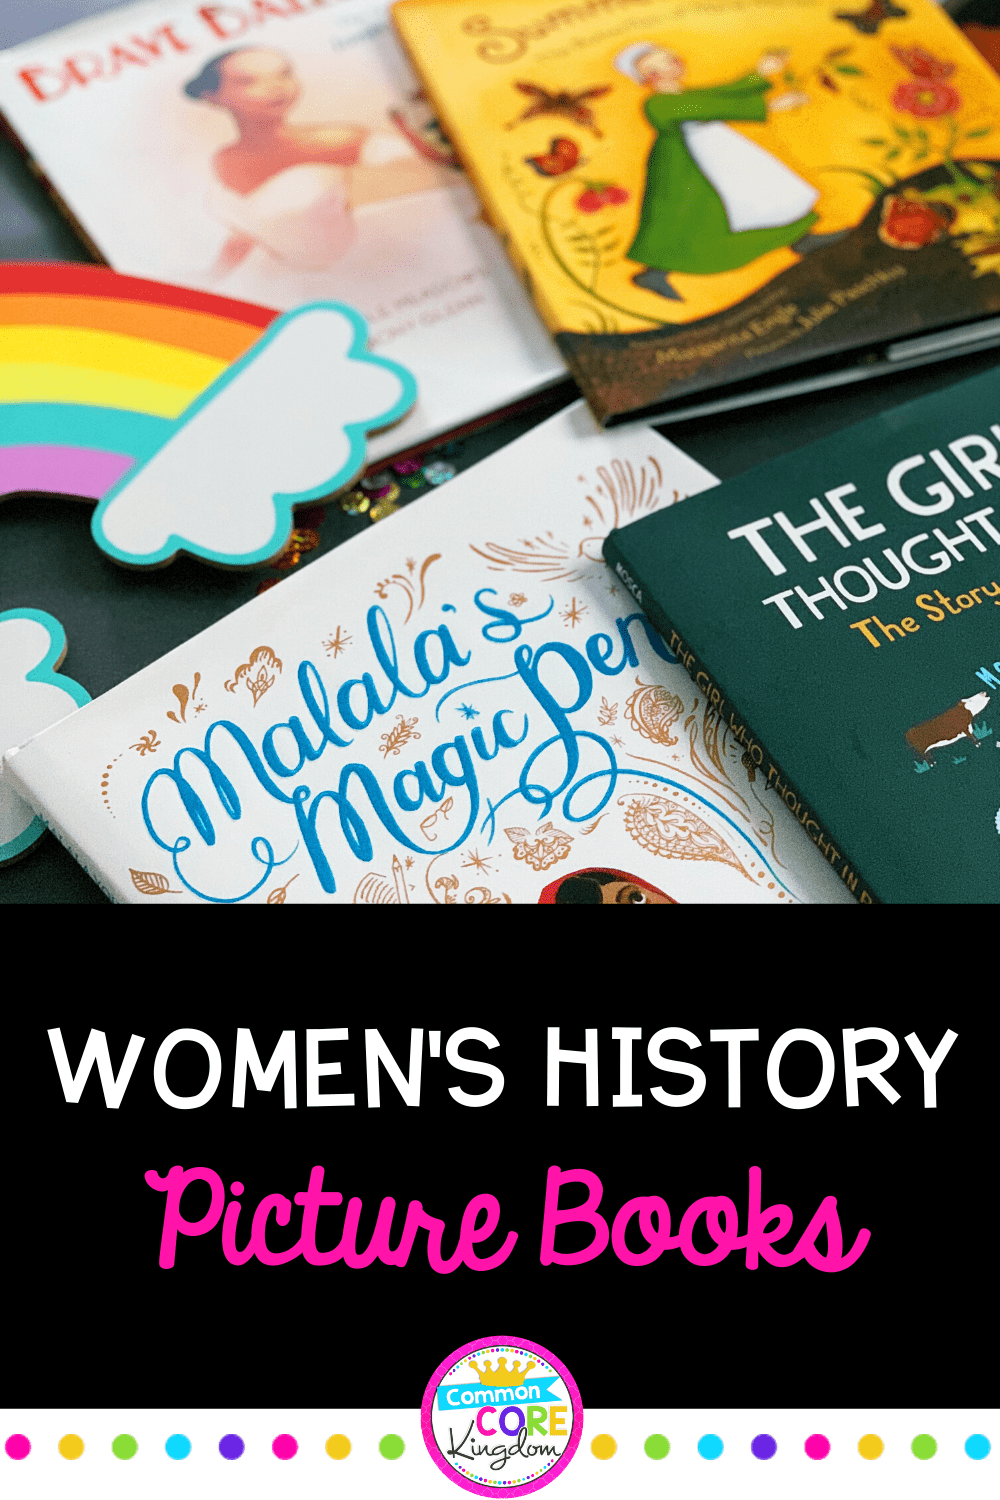 Women's History Picture Books Blog Post Cover